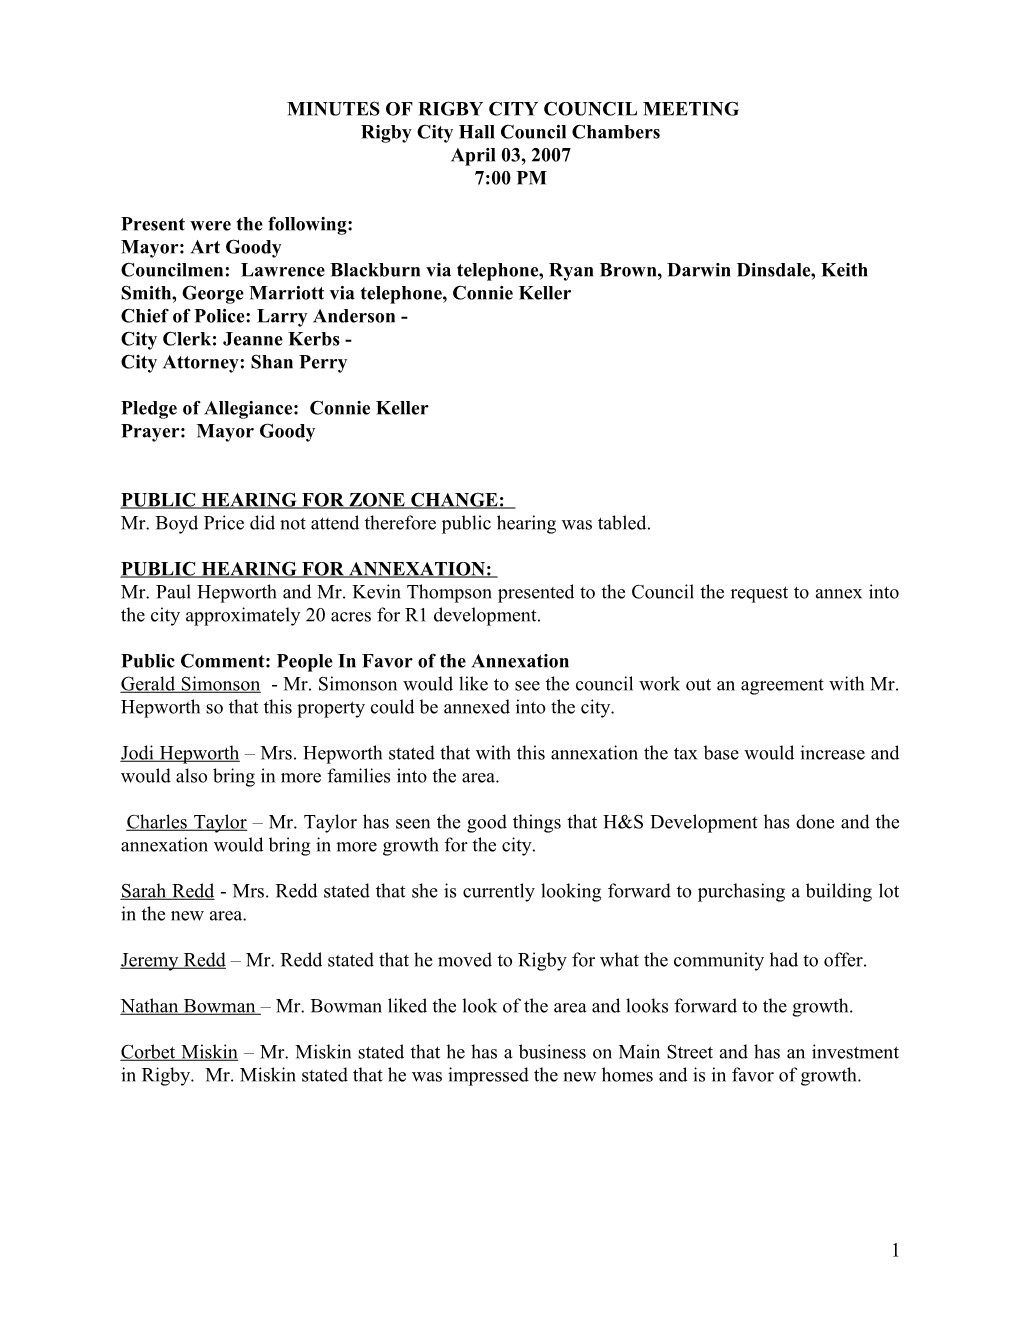 Minutes of Rigby City Council Meeting